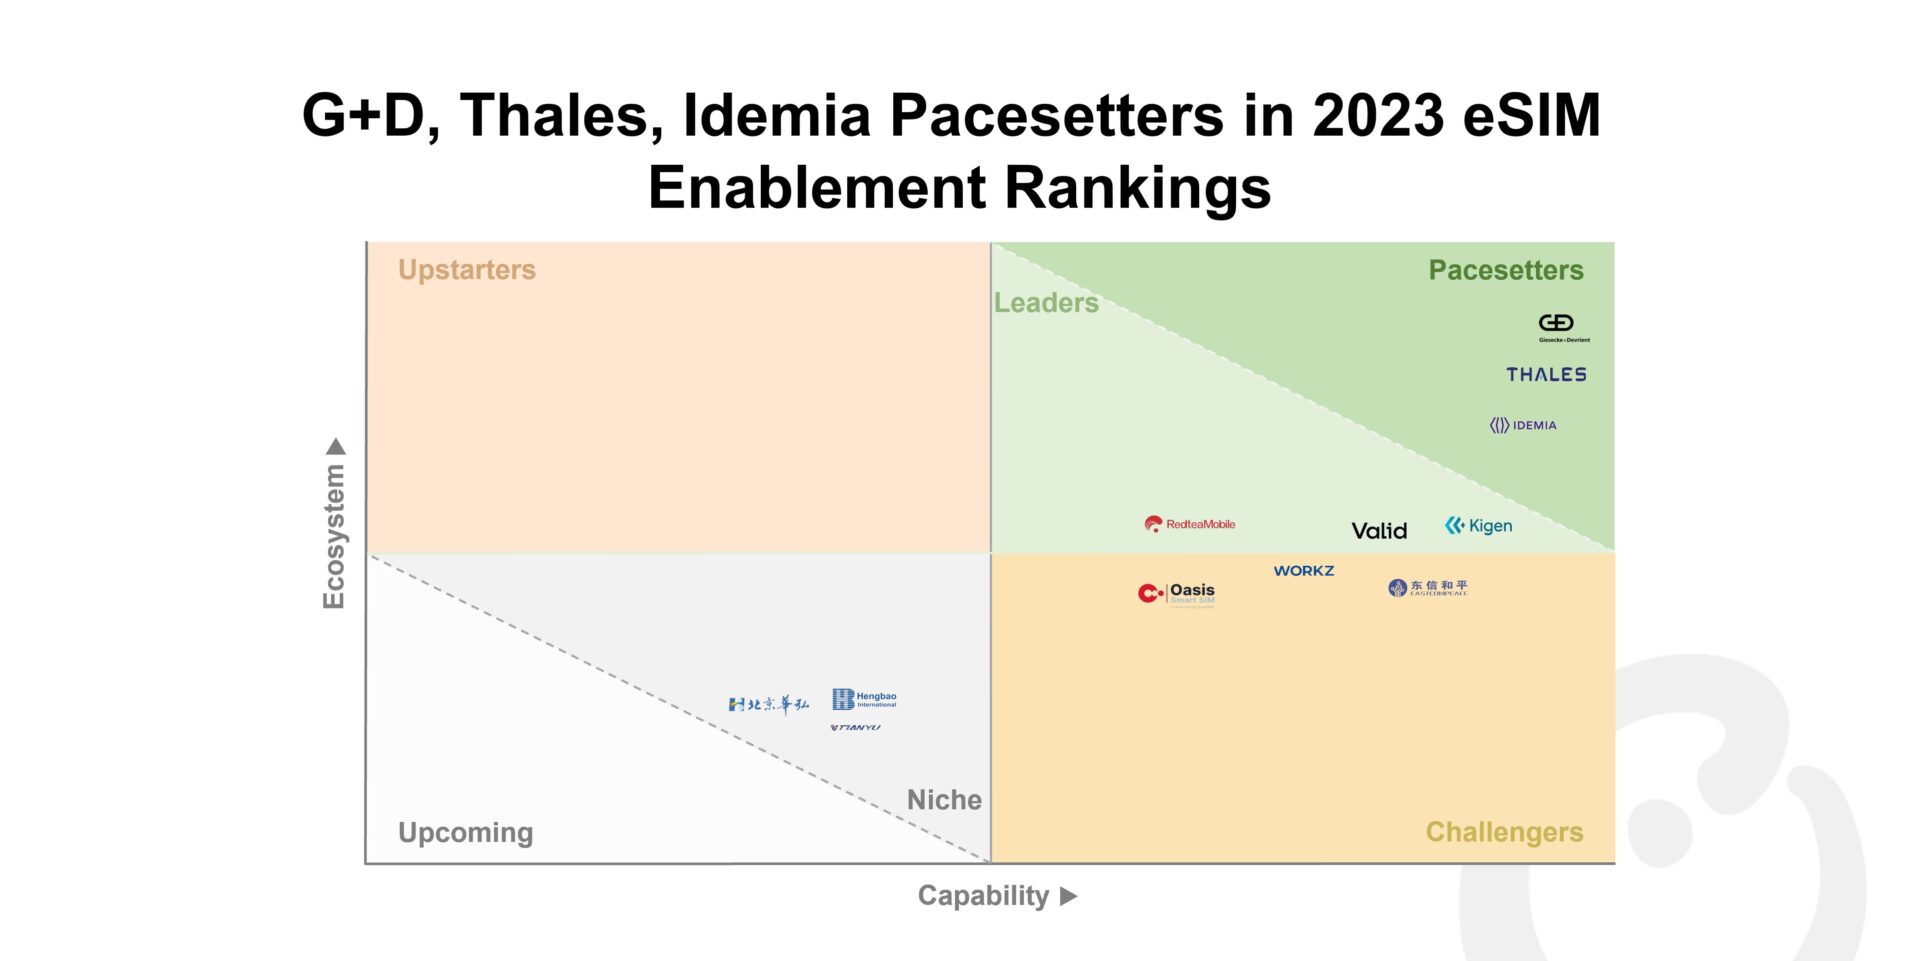 A chart showing the Global eSIM Enablement Landscape in 2023